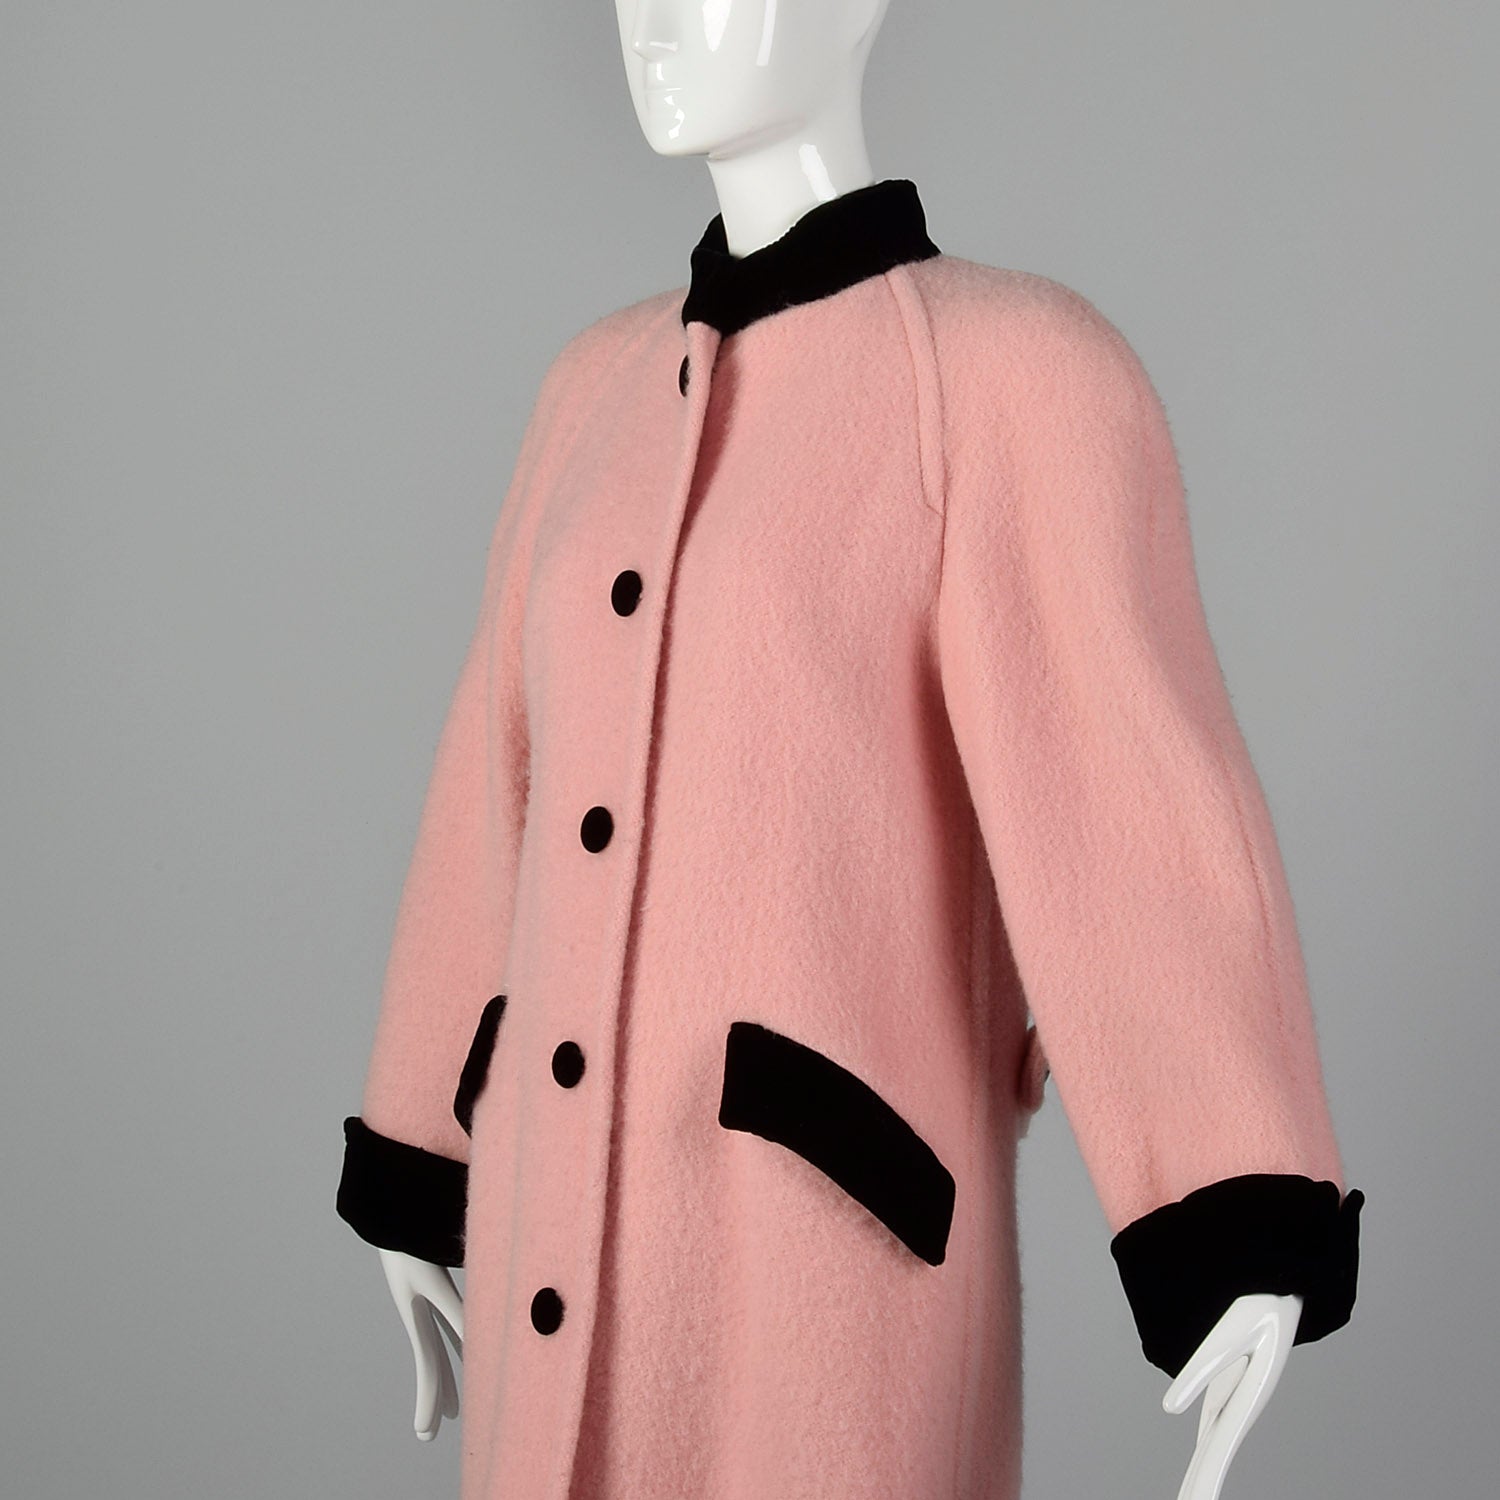 Small 1980s Pink Wool Jacket